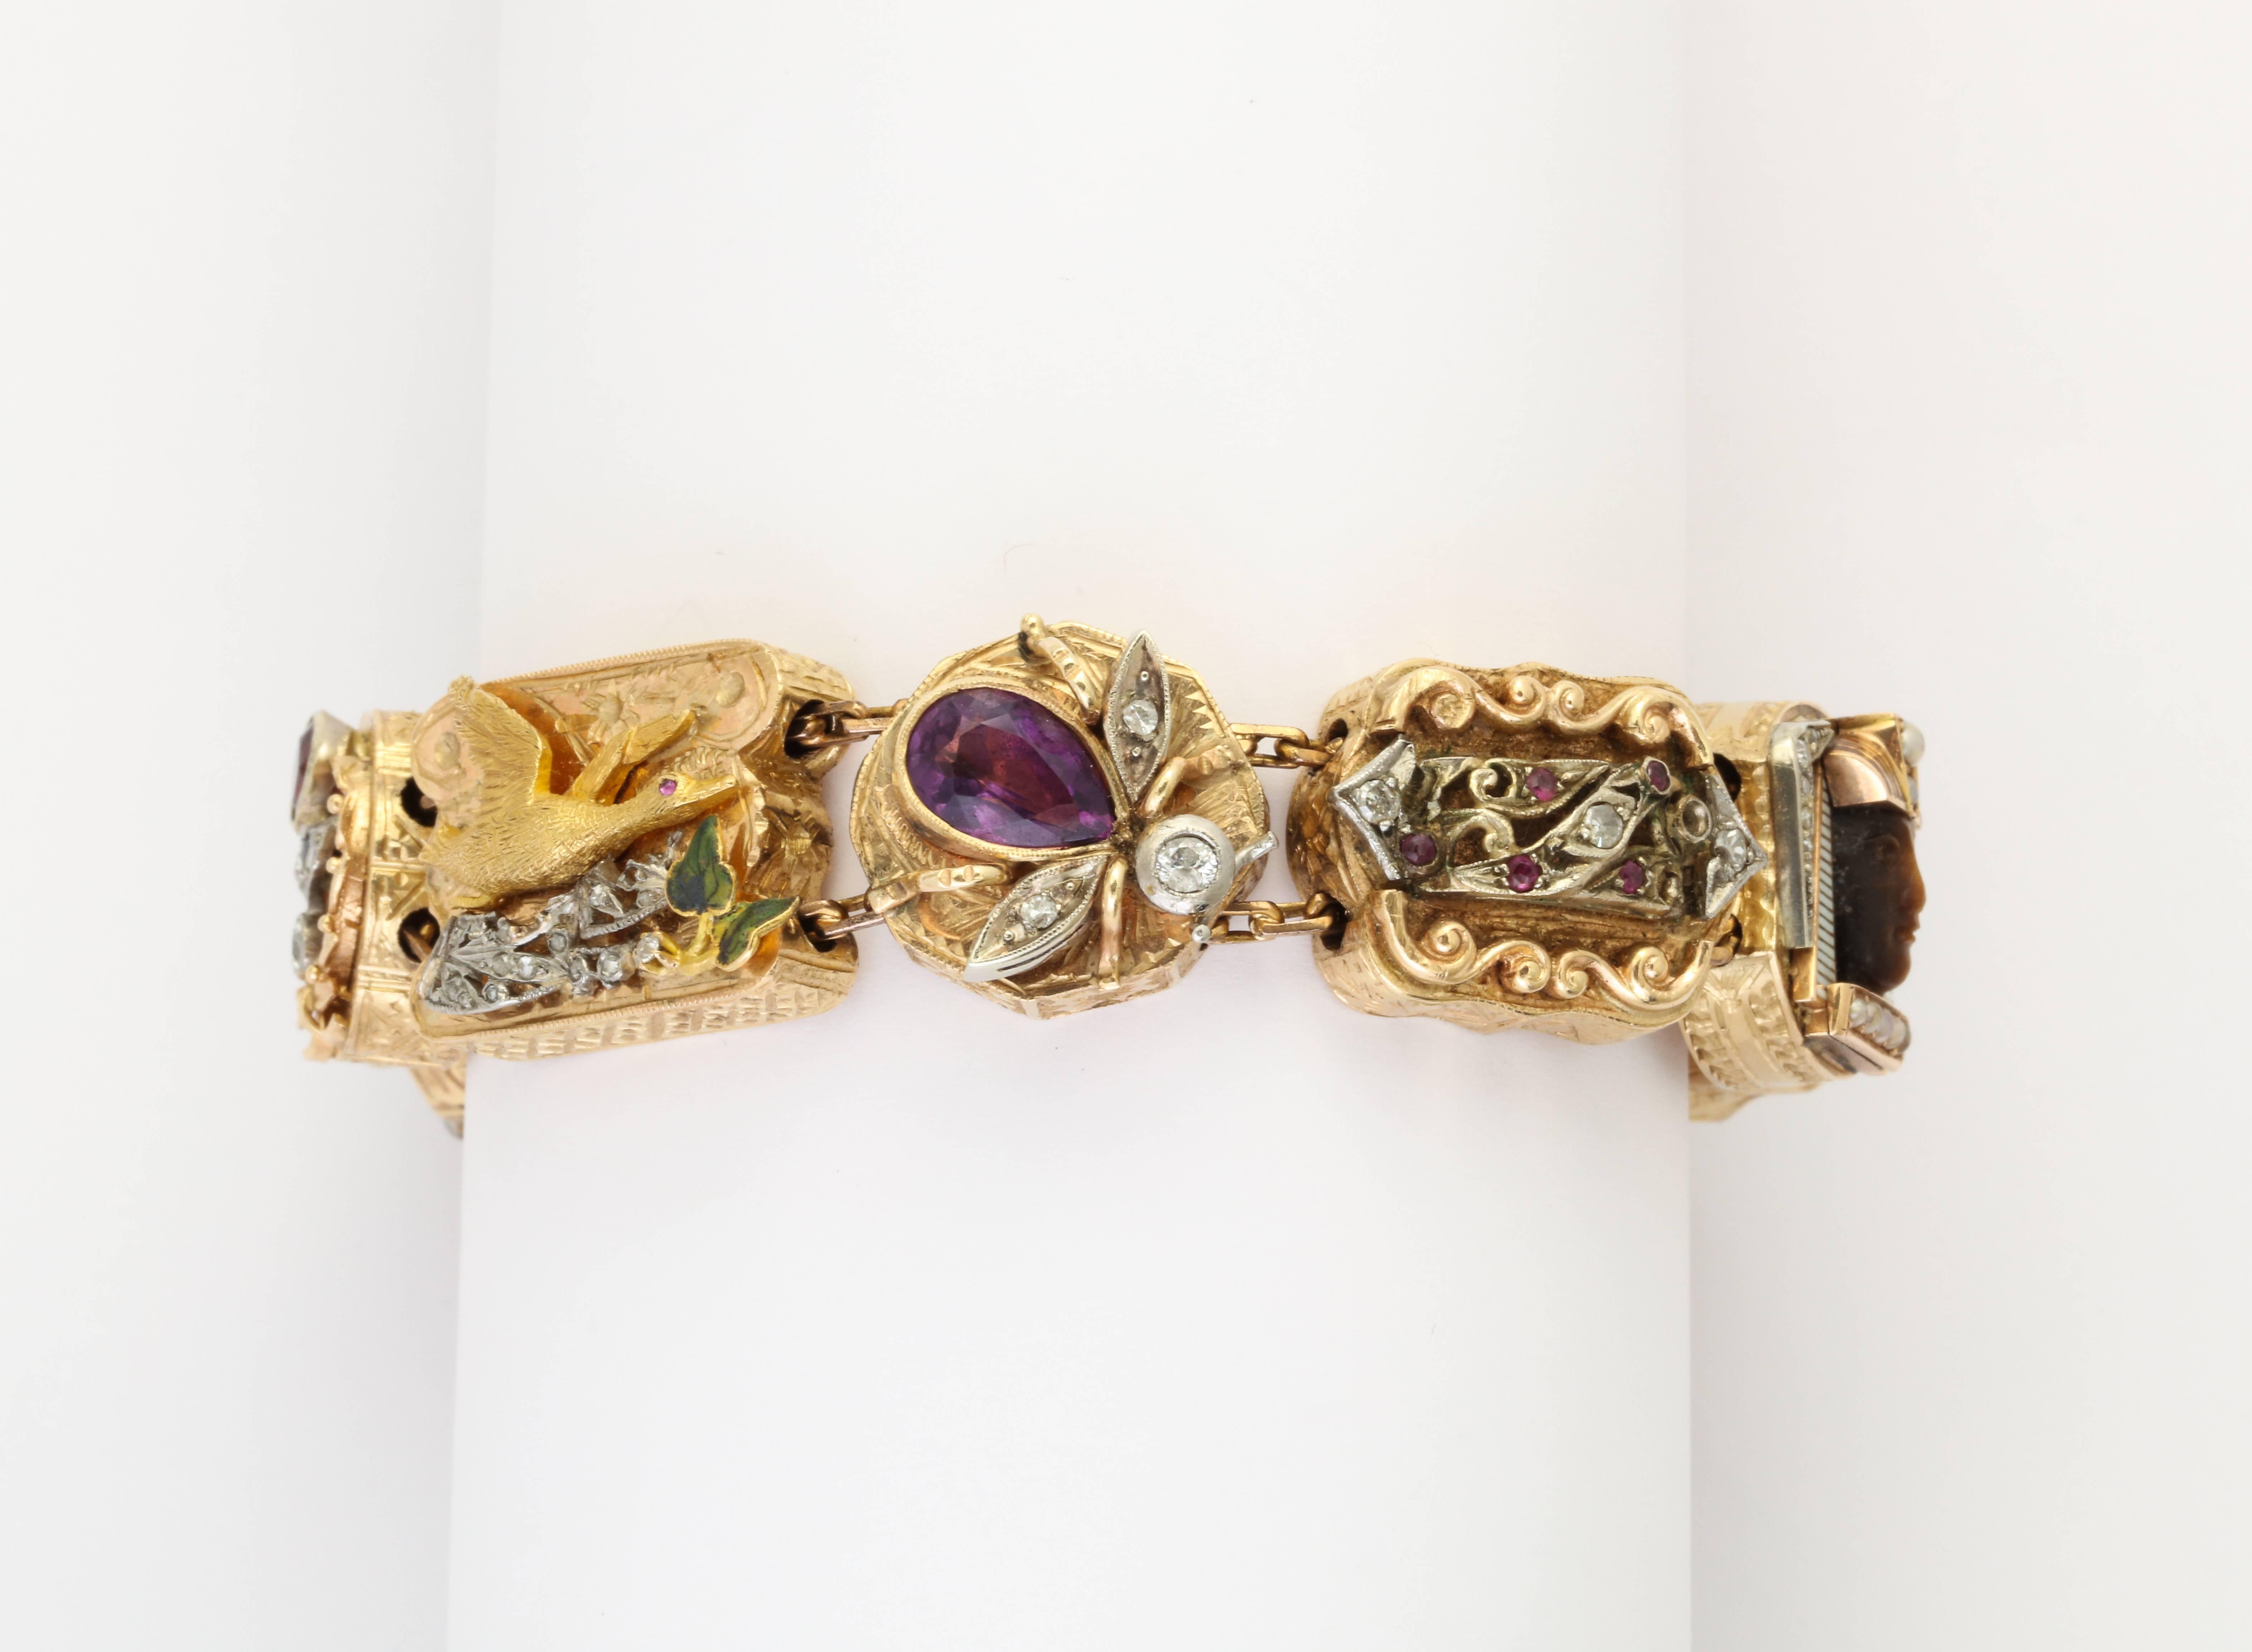 A slide charm bracelet featuring 9 rectangular victorian era watch slides, refashioned as a slide charm bracelet. This became a fashion trend in the 1930's, after the introduction of ladies wrist watches, when watch fobs and watch pendants were no